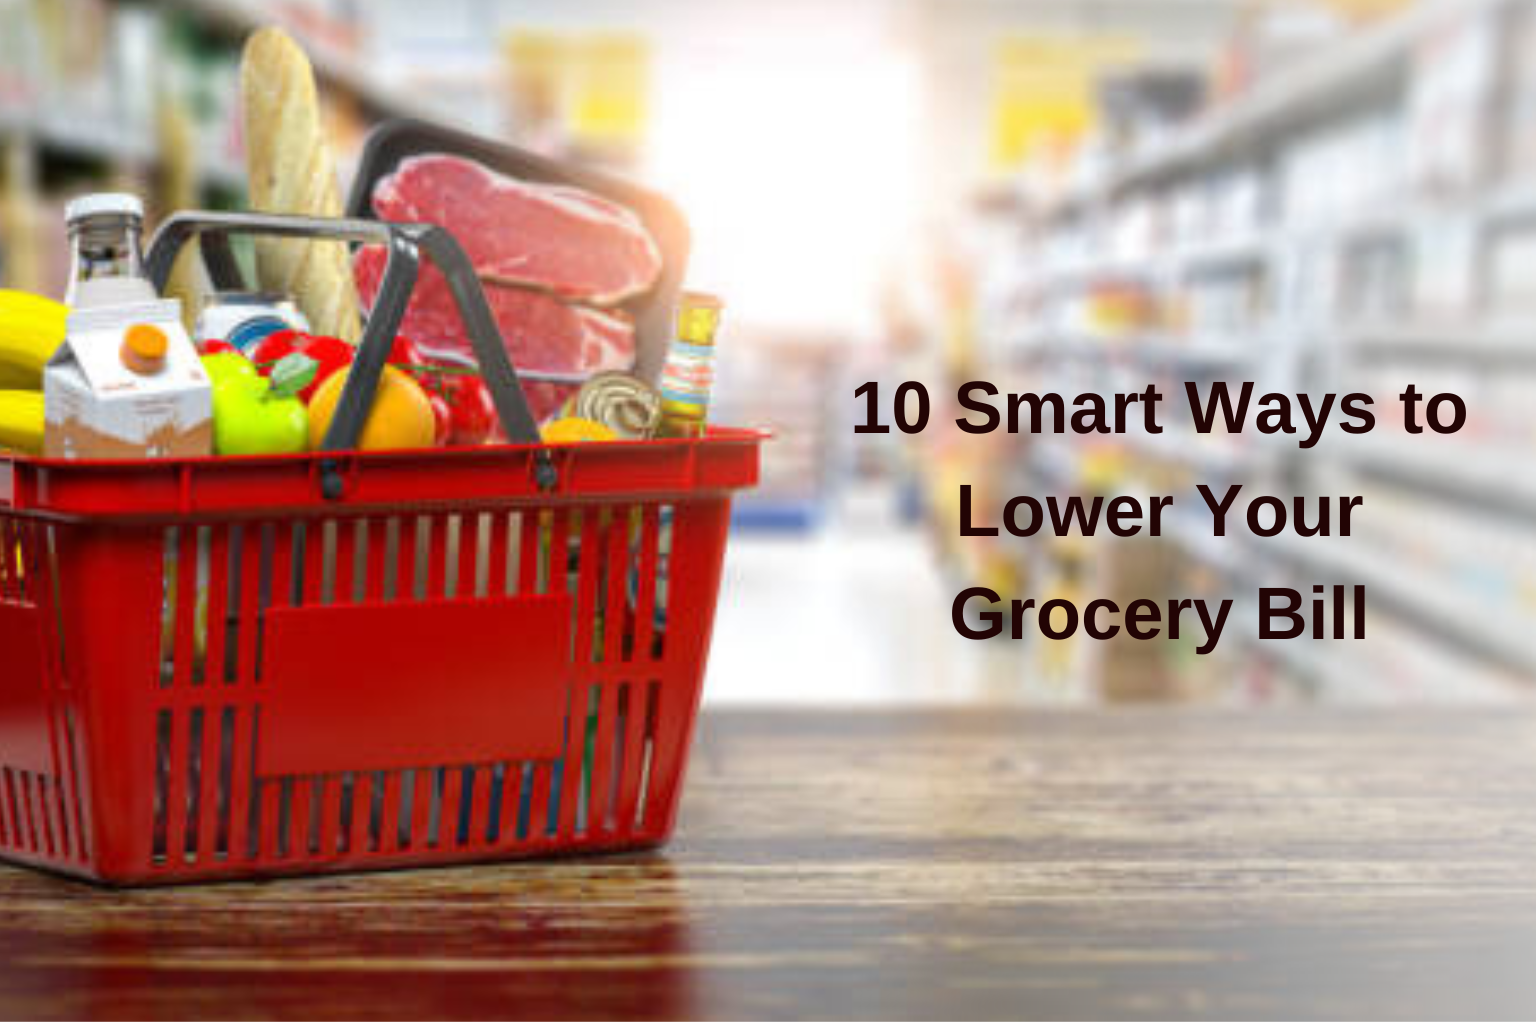 10 Smart Ways to Lower Your Grocery Bill